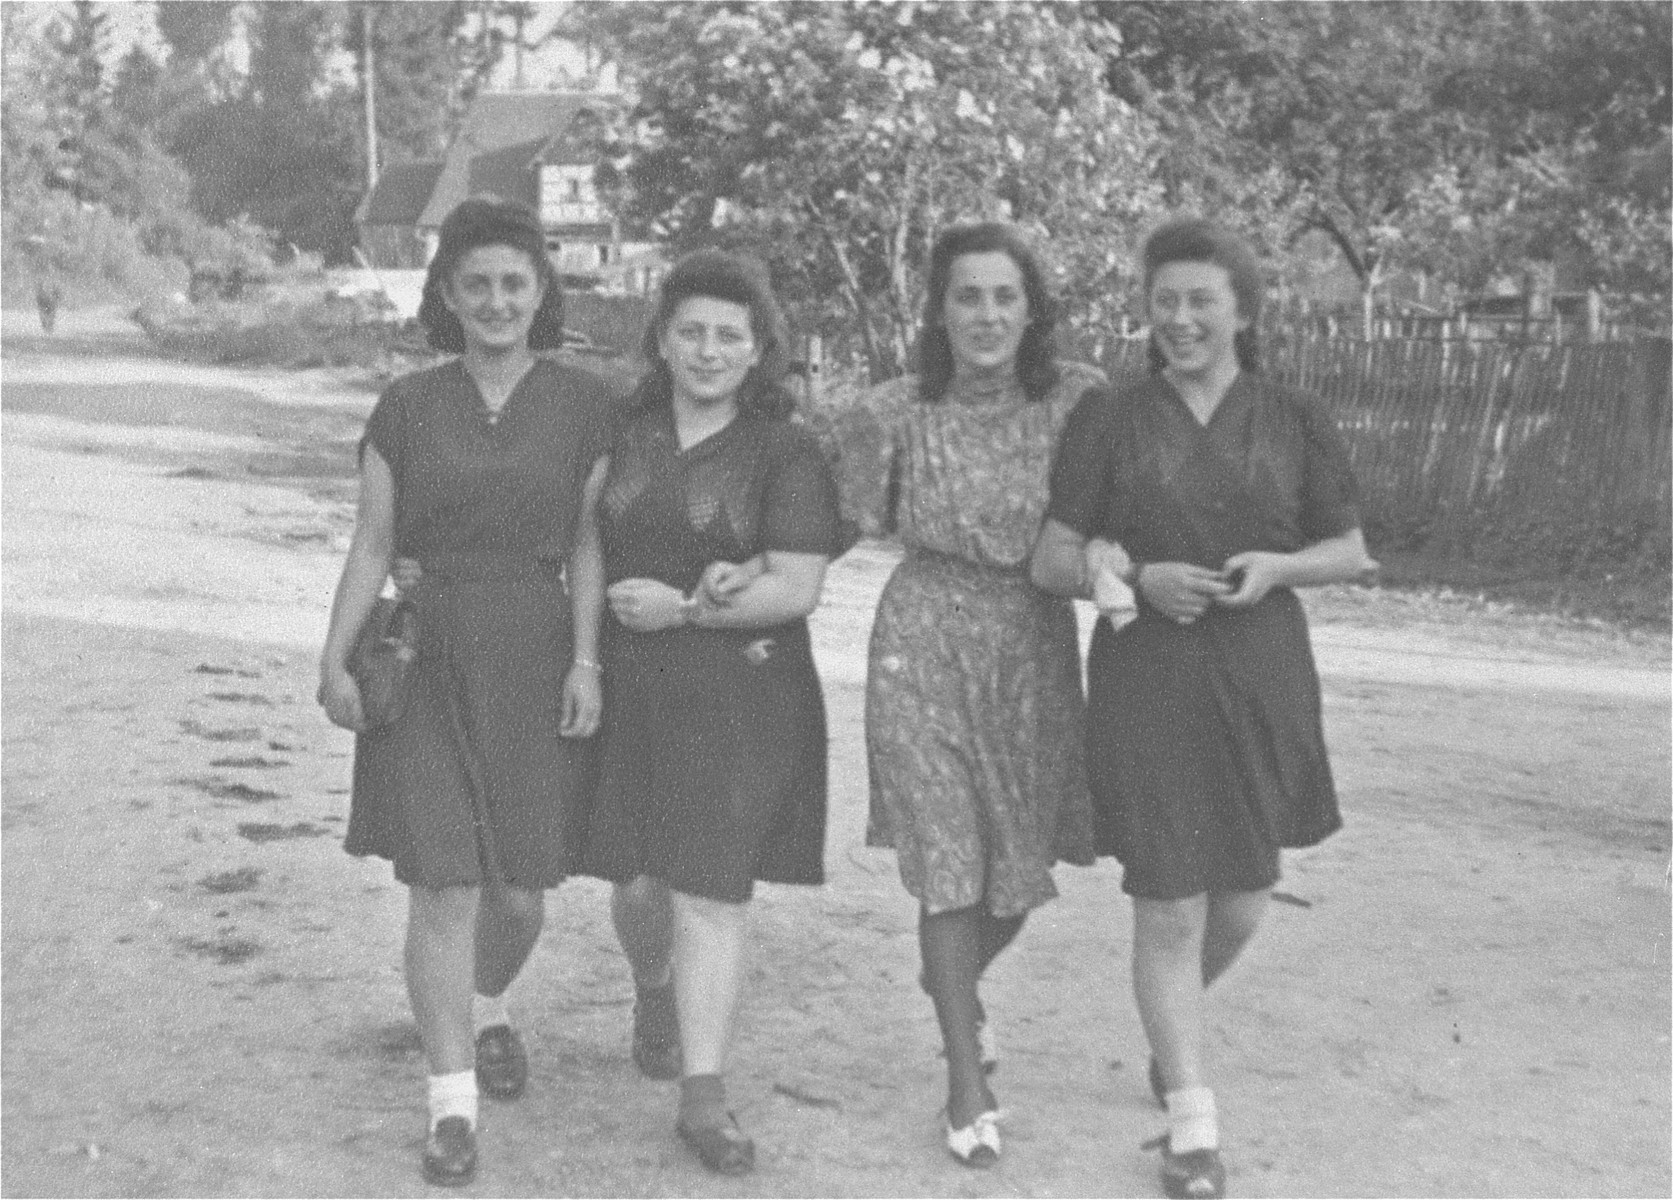 Four young Jewish women who were recently liberated from the Schatzlar labor camp, walk arm-in-arm along a road.

Pictured from left to right are: unknown, Herscovicz (from Sosnowiec), Gusta Fiszgrund (from Crzanow), and Pola Herscovicz (from Sosnowiec).